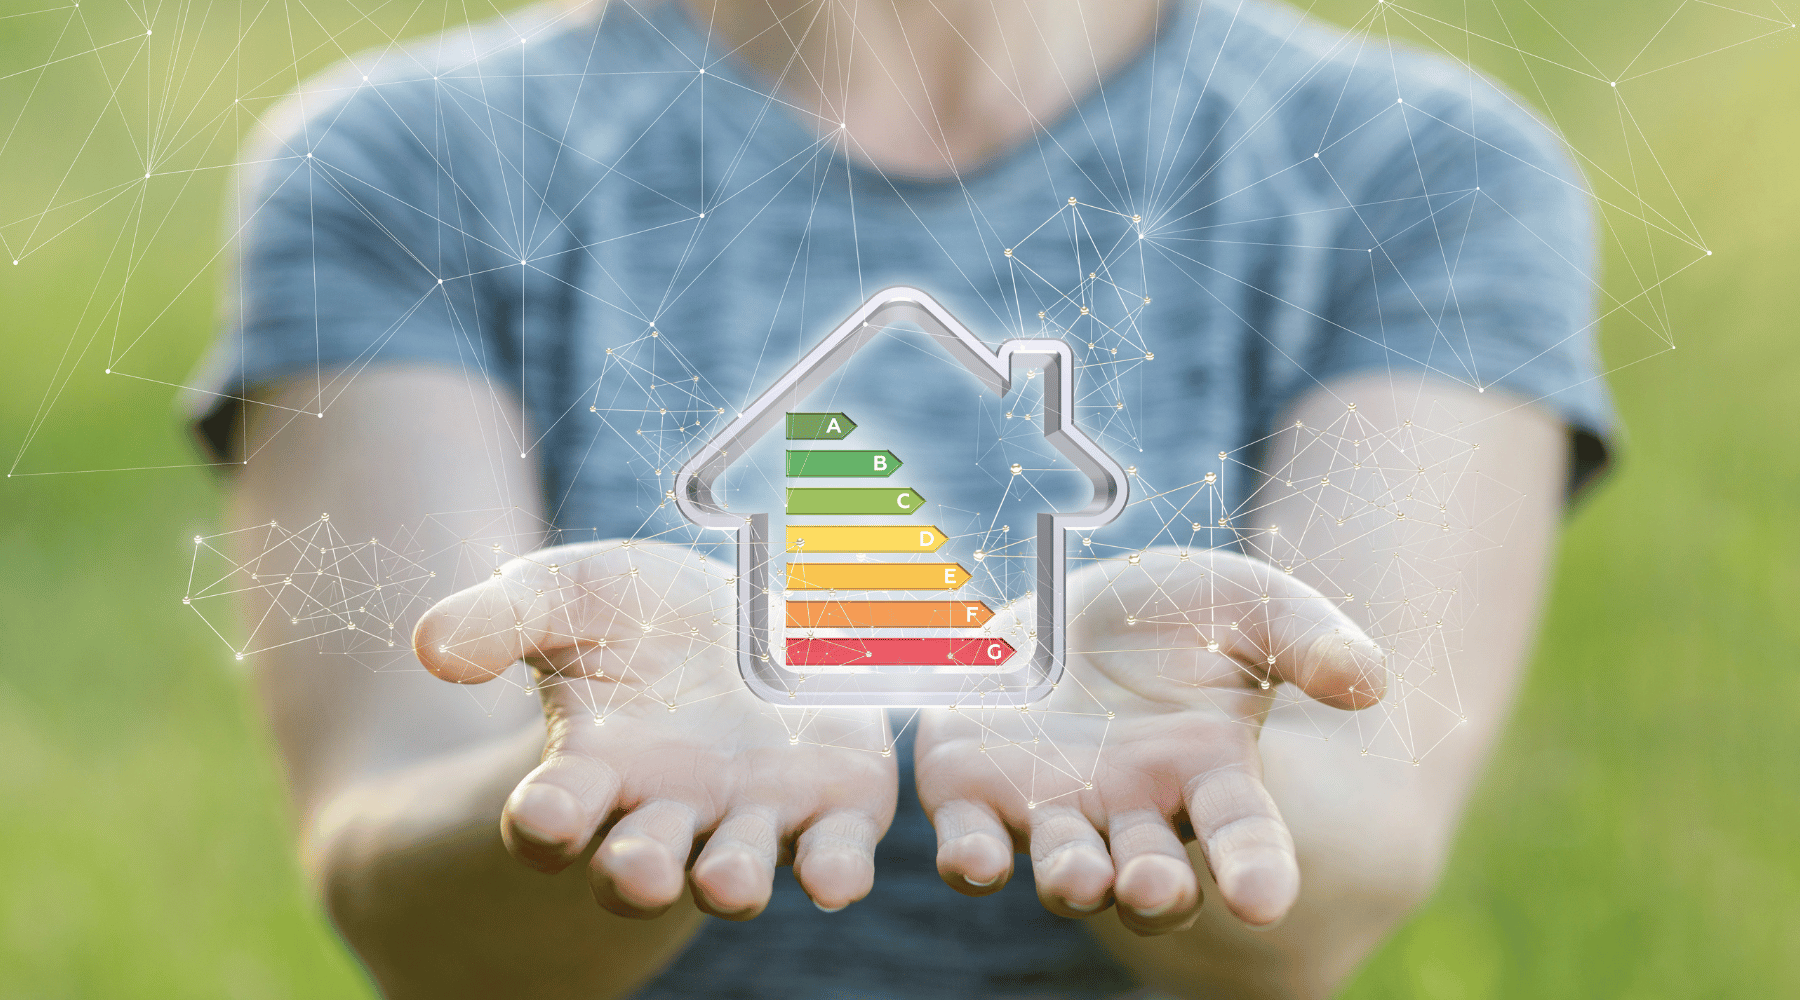 BEST ENERGY-SAVING DEVICES FOR YOUR HOME